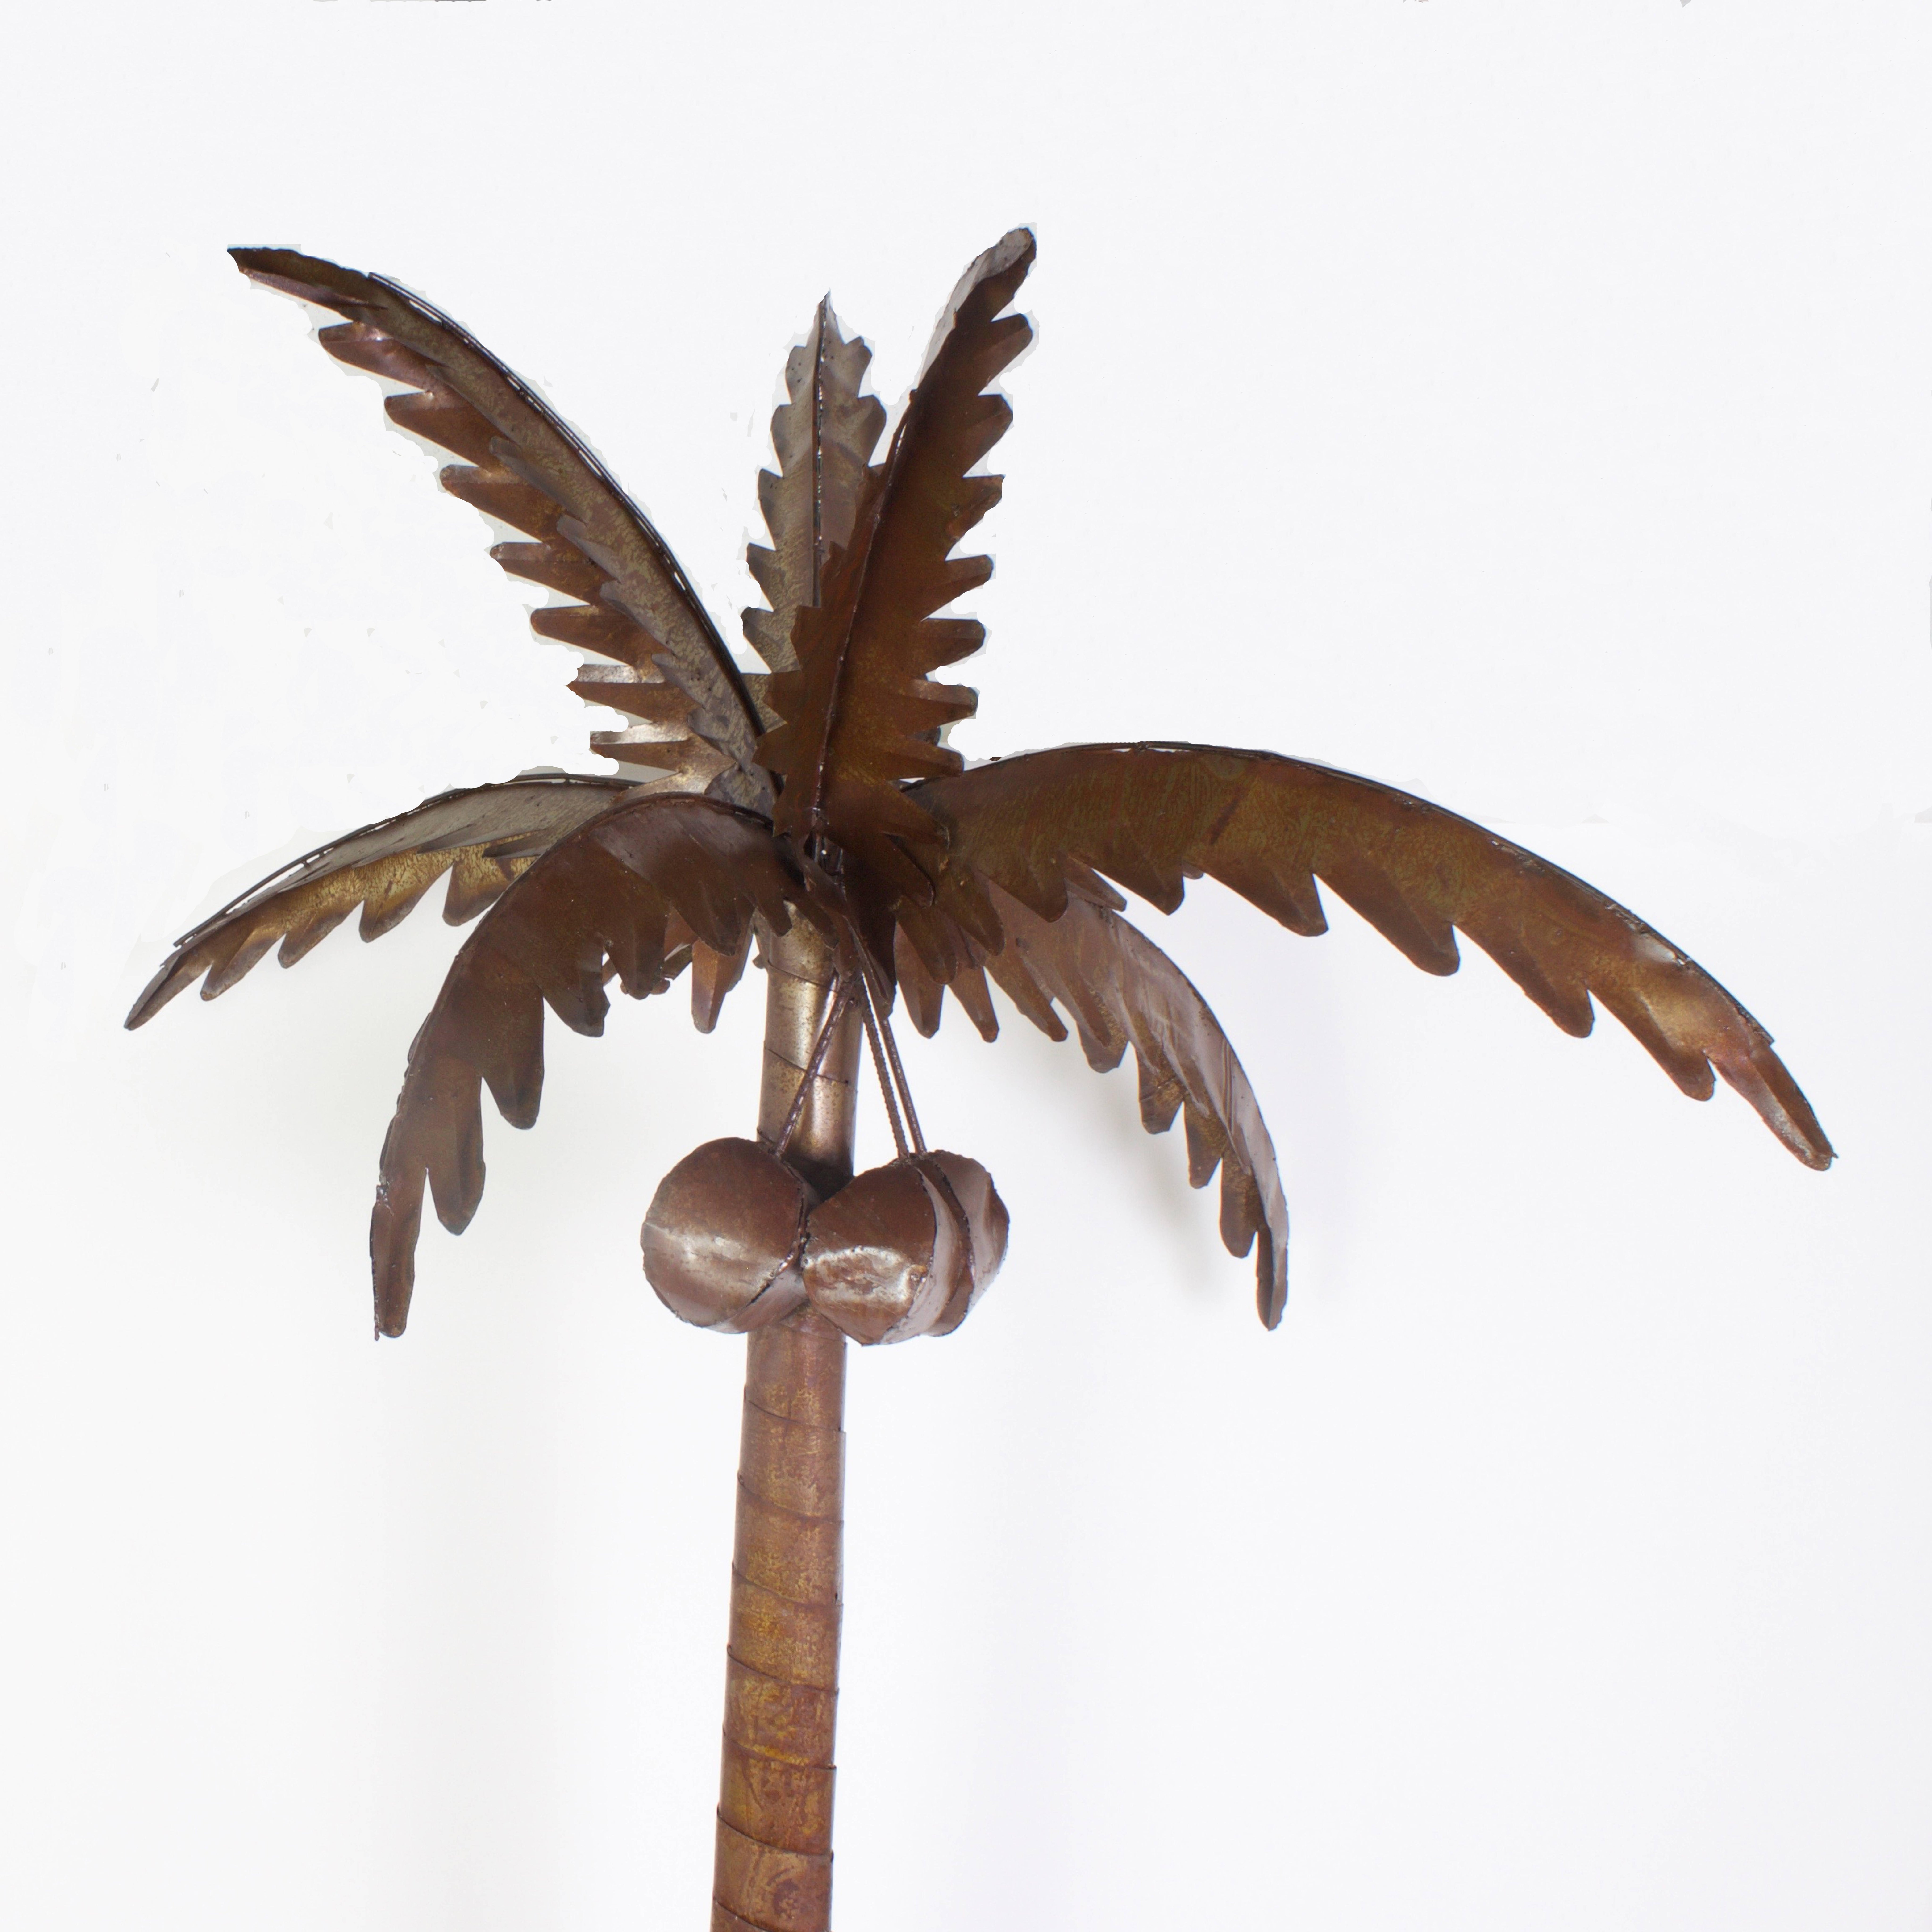 Folky Mid-Century metal palm tree sculpture complete with coconuts and plenty of decorative impact. Featuring an earthy and rustic oxidized finish with generous proportions. Perfect for island or coastal living, bringing a taste of the tropics to